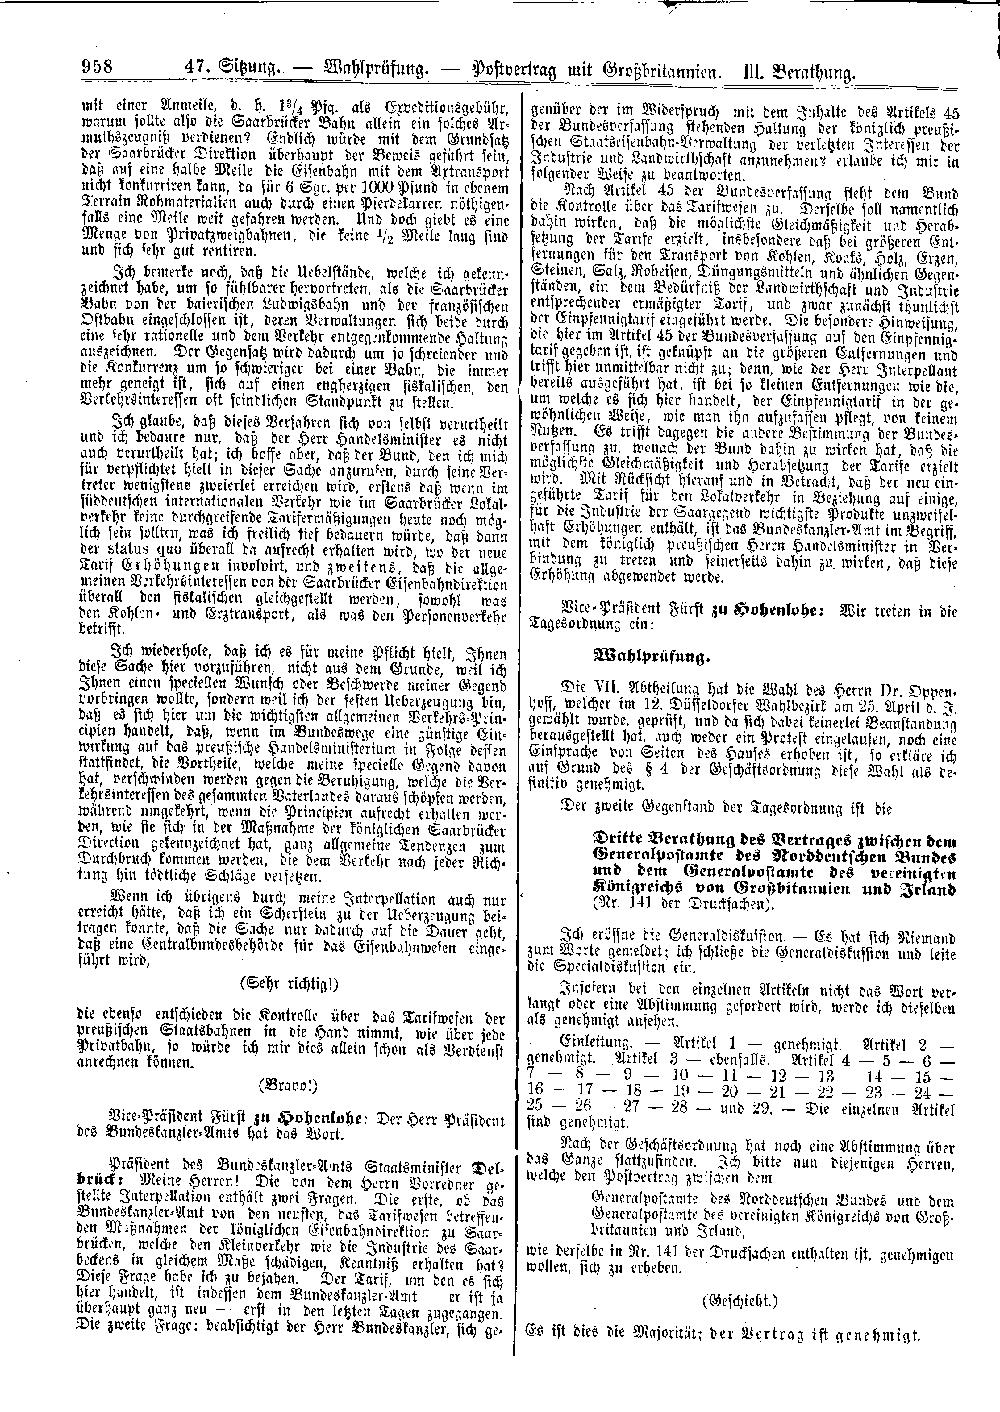 Scan of page 958